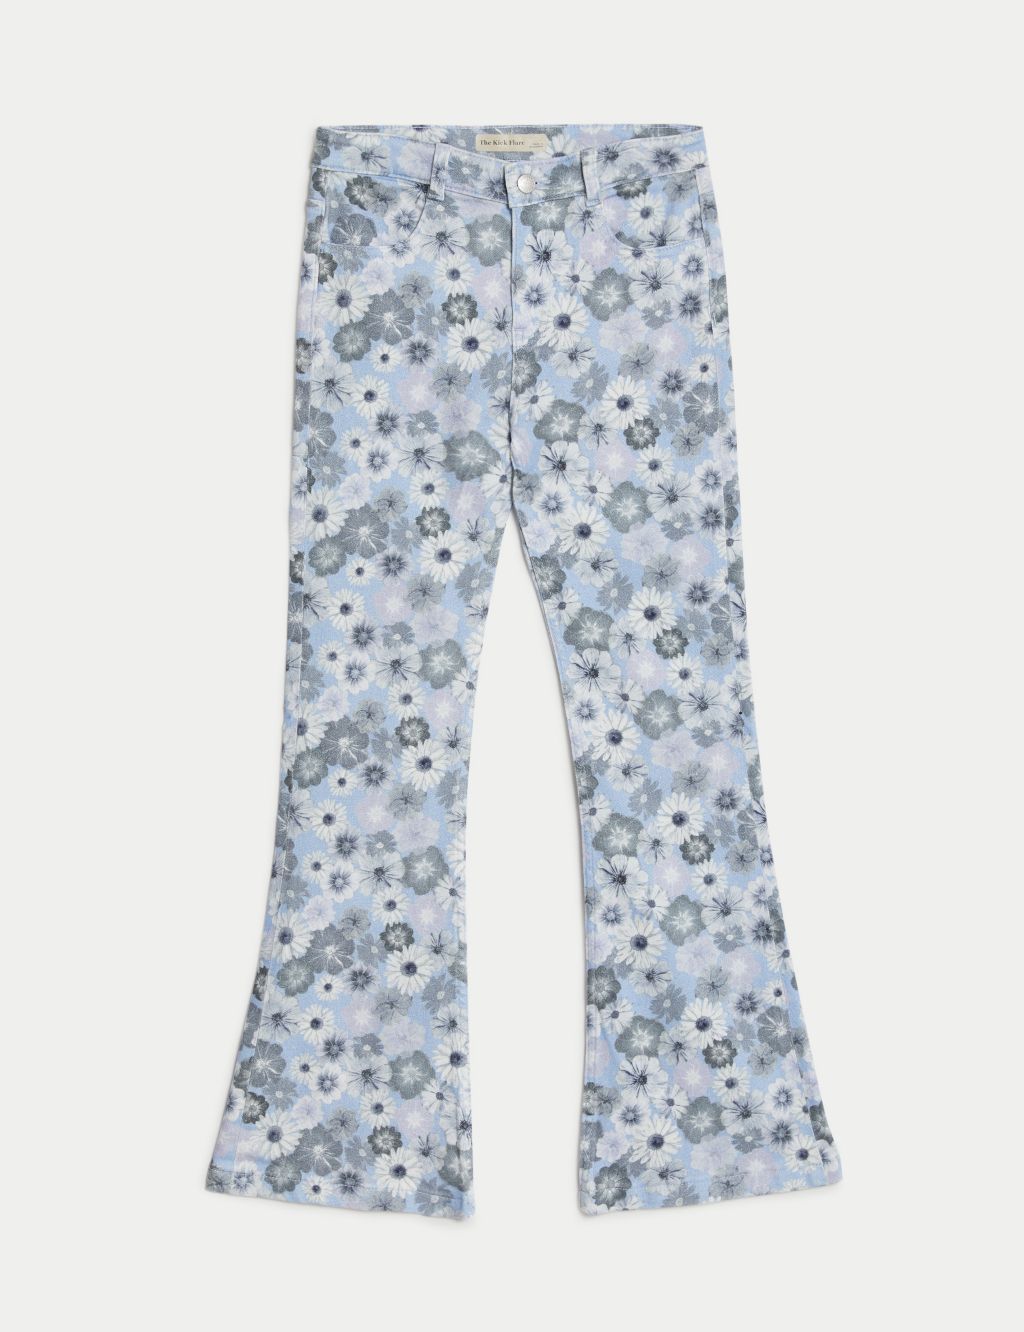 Floral Flared Jeans (6-16 Yrs) image 2